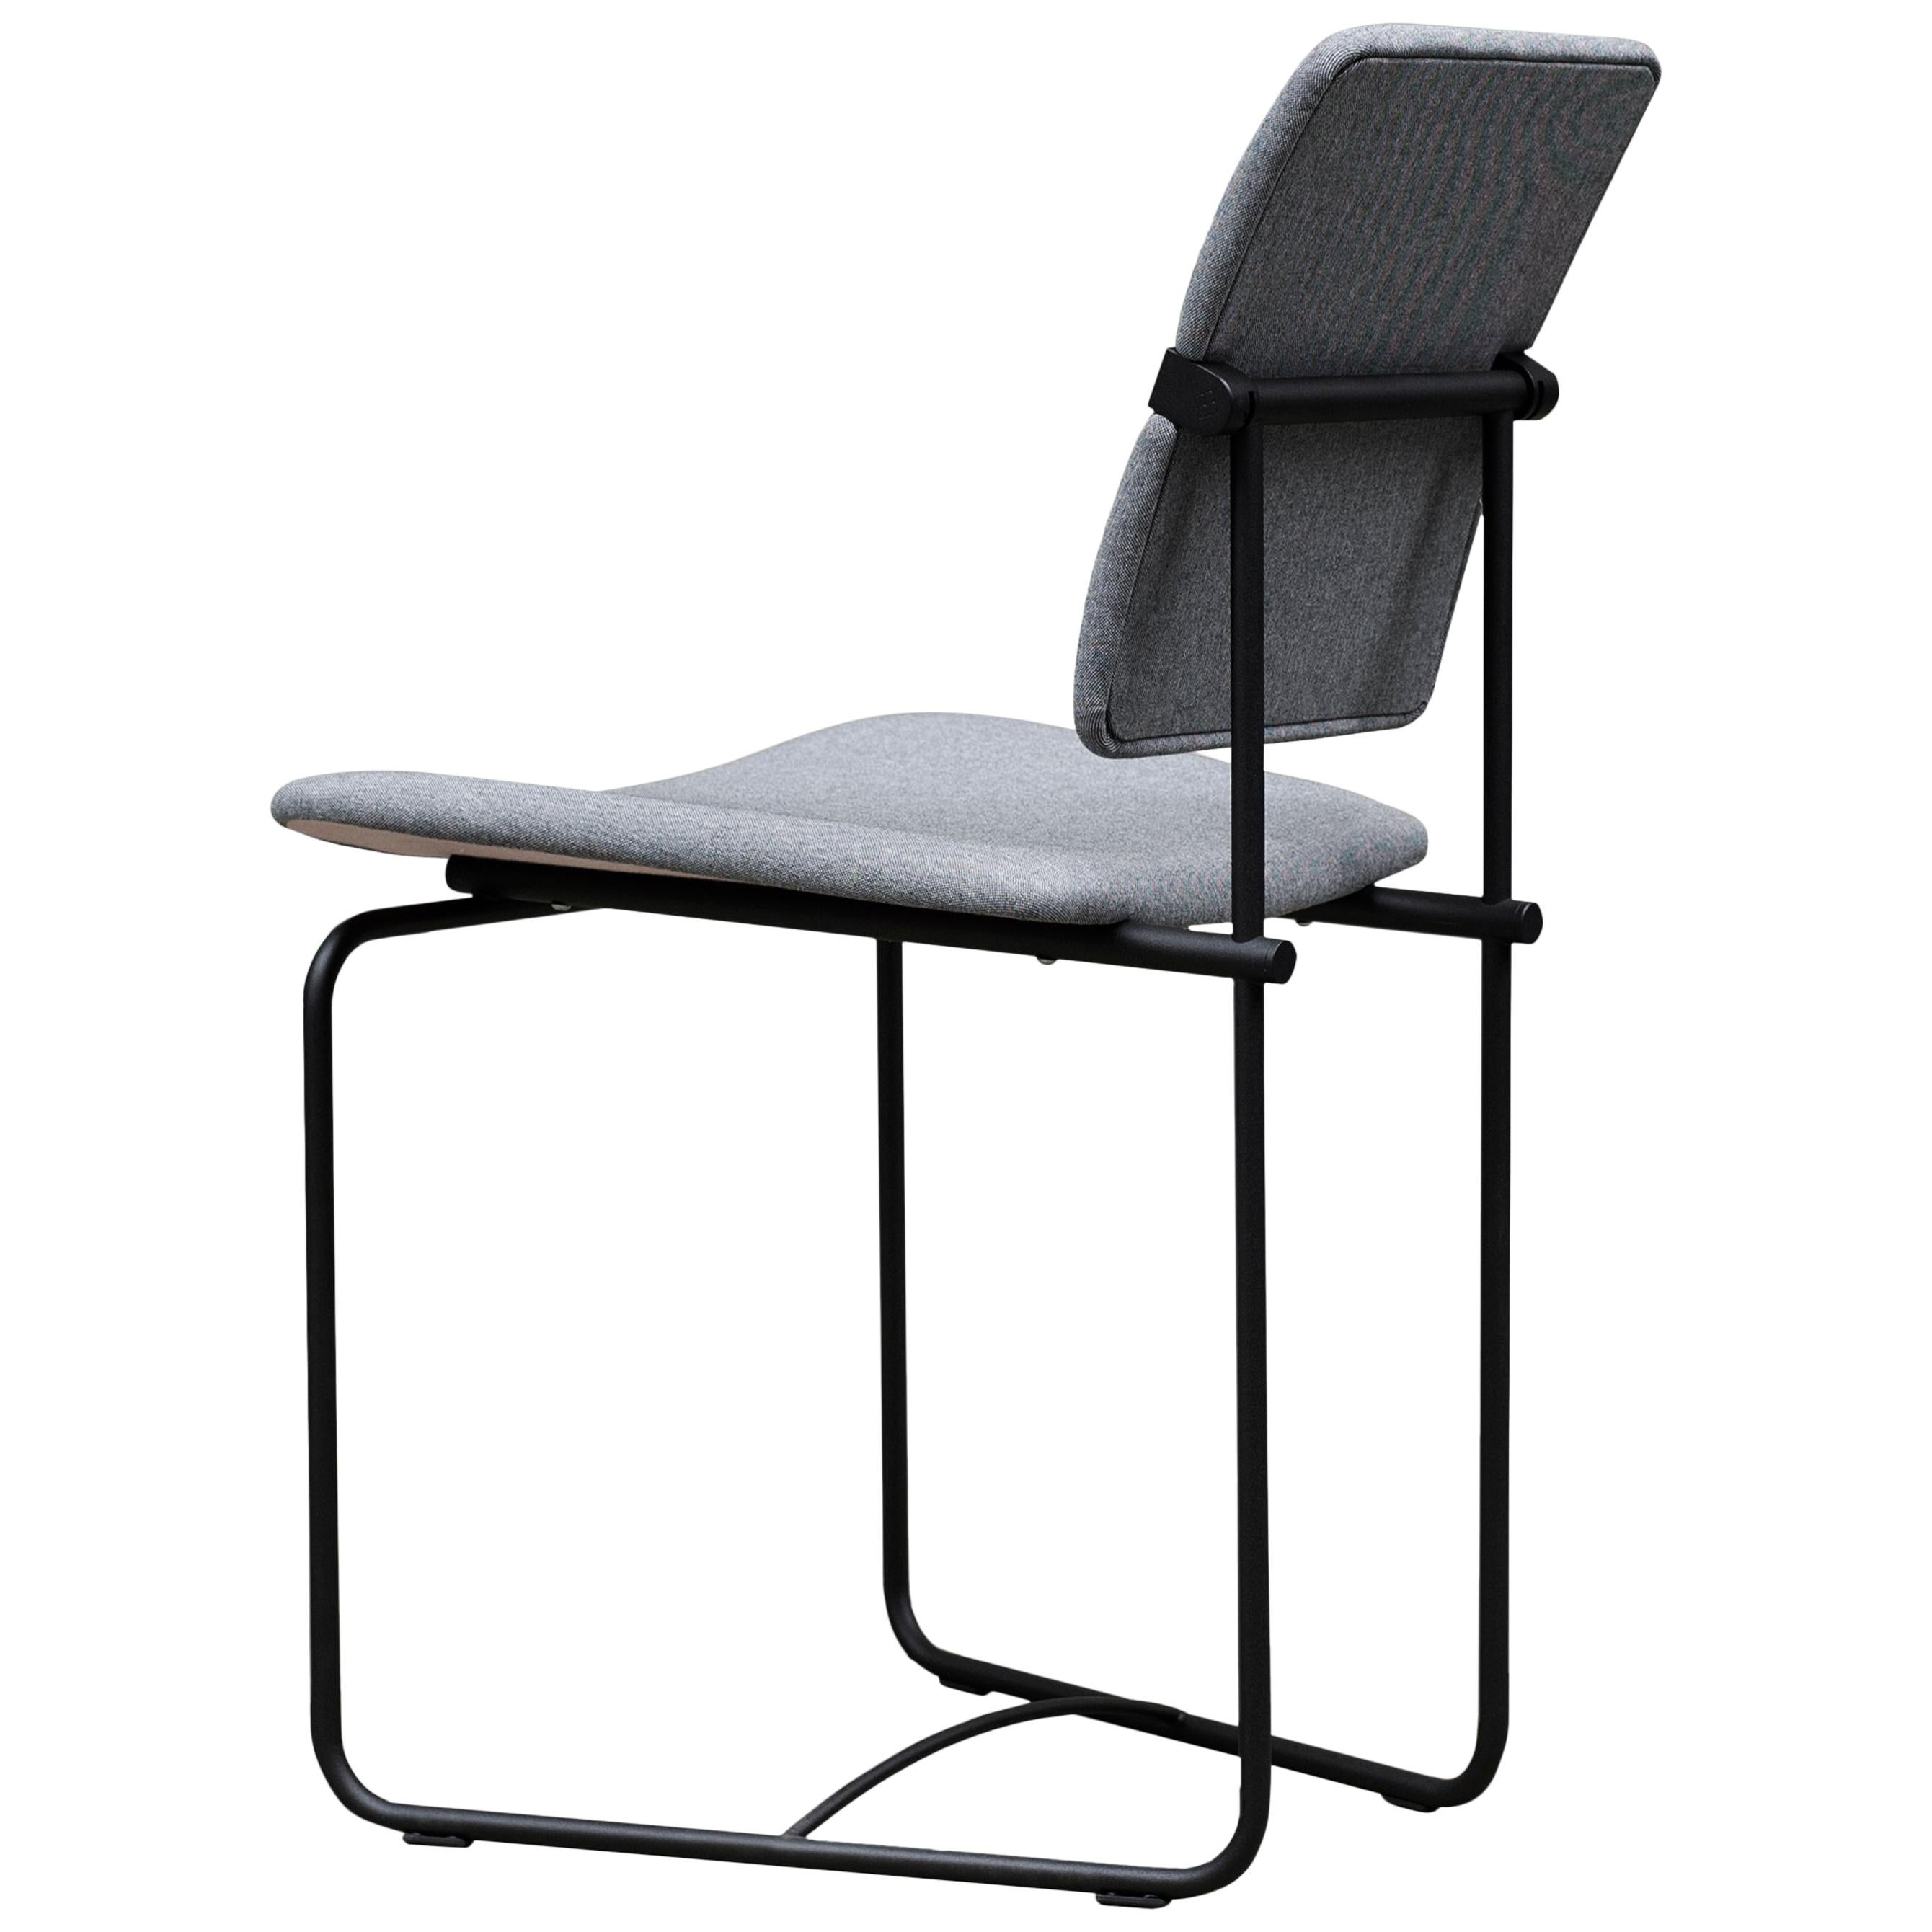 Peter Ghyczy Chair Urban Jodie 'S02' Charcoal / Grey Fabric